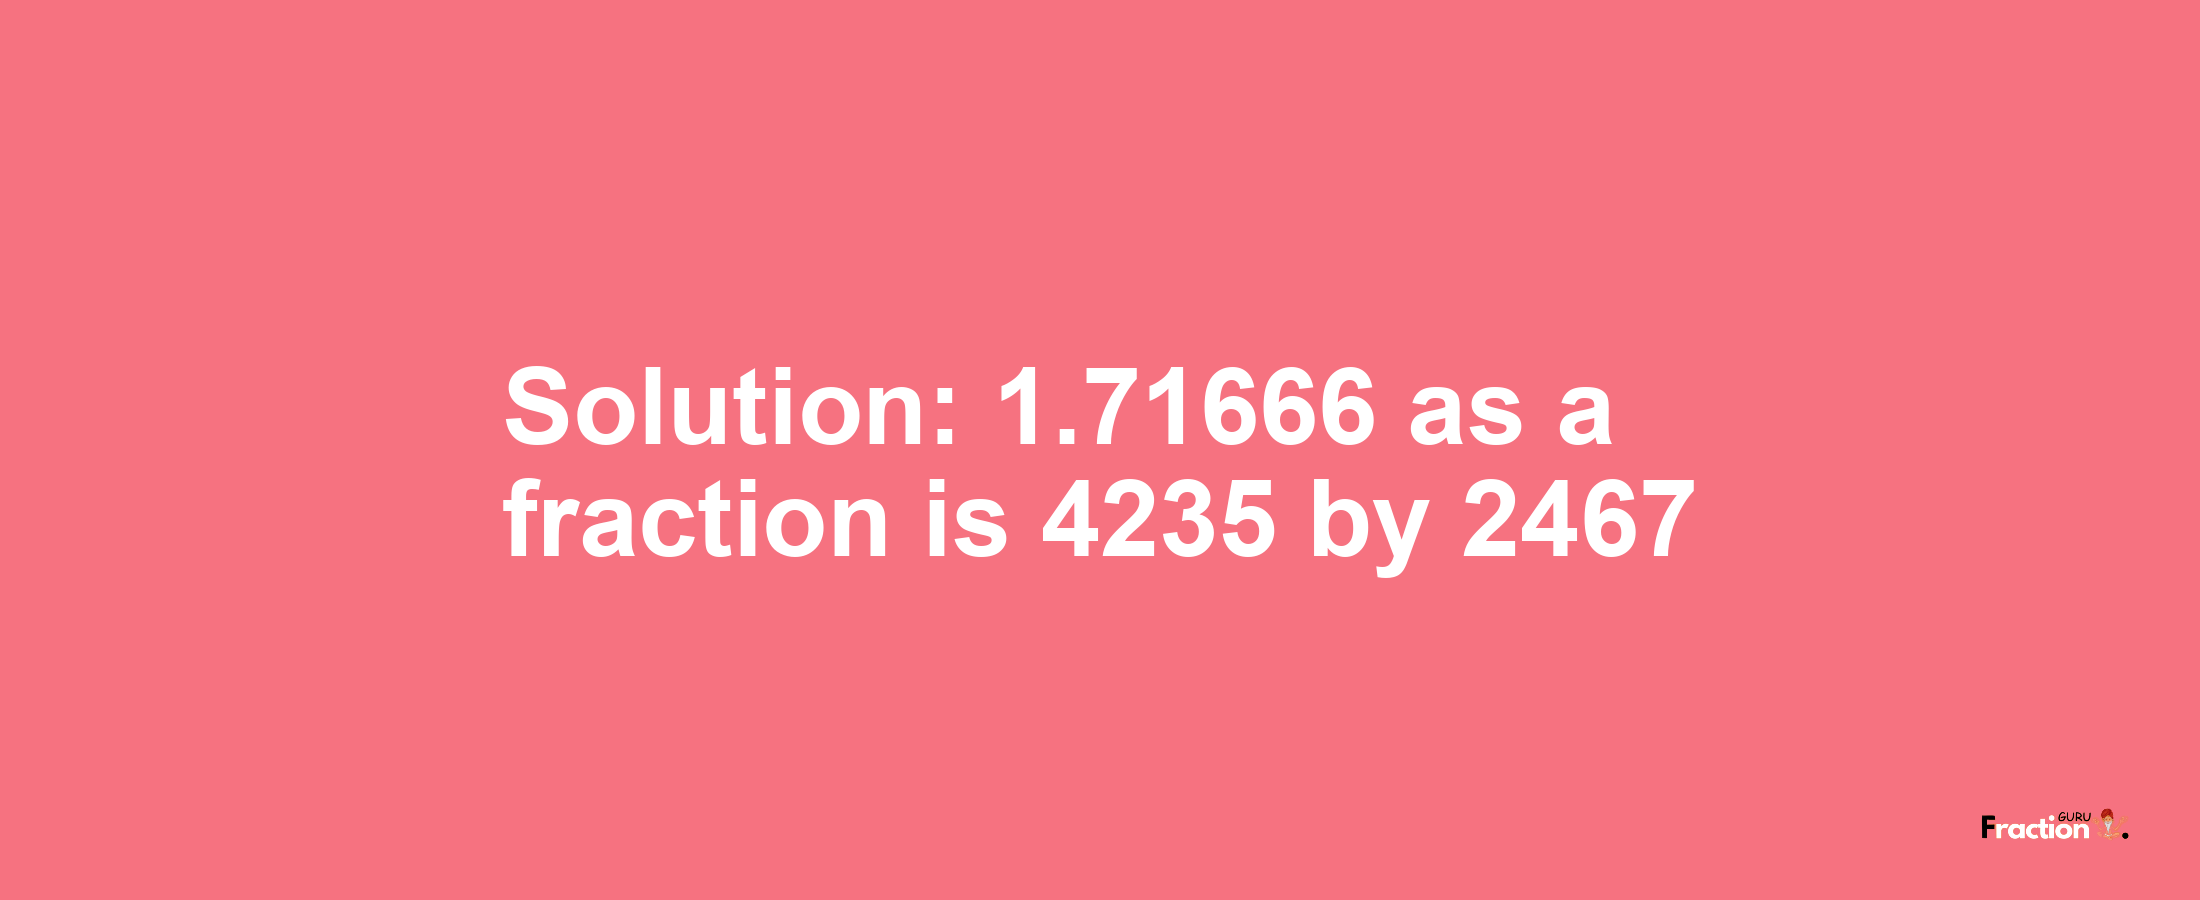 Solution:1.71666 as a fraction is 4235/2467